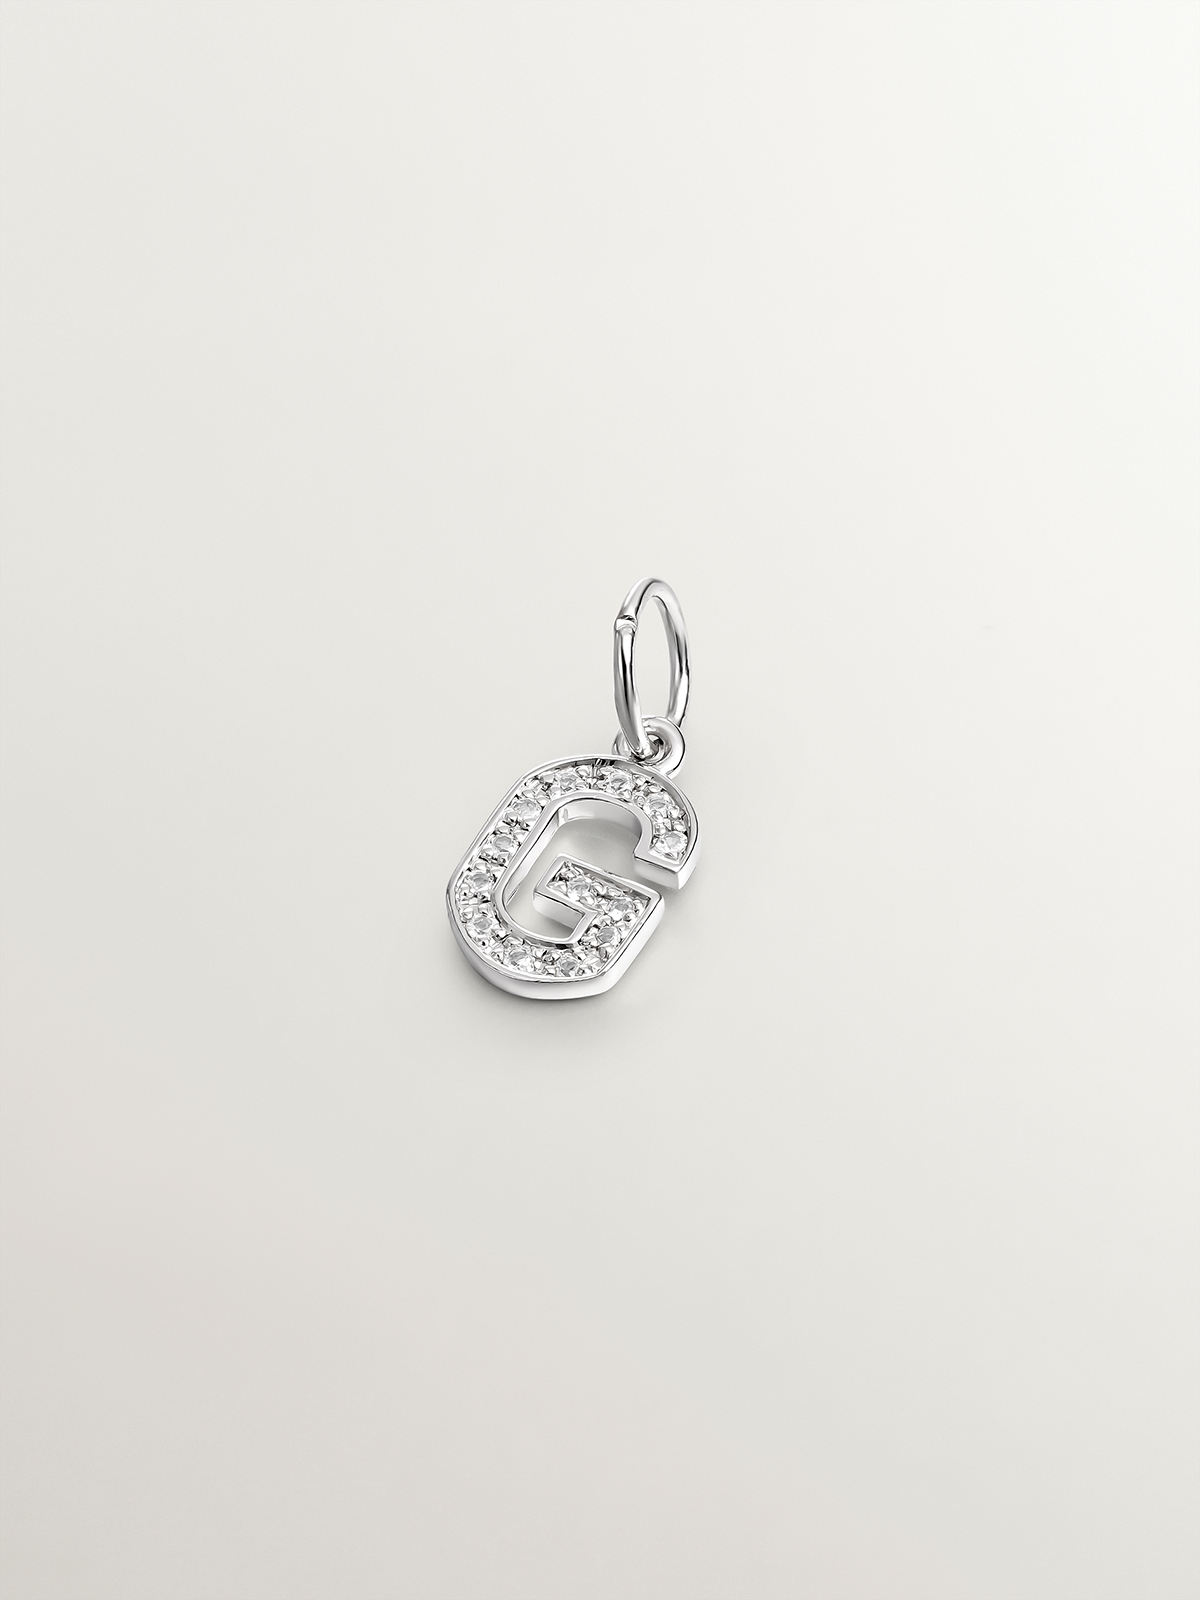 925 Silver Charm with White Topaz Initial G